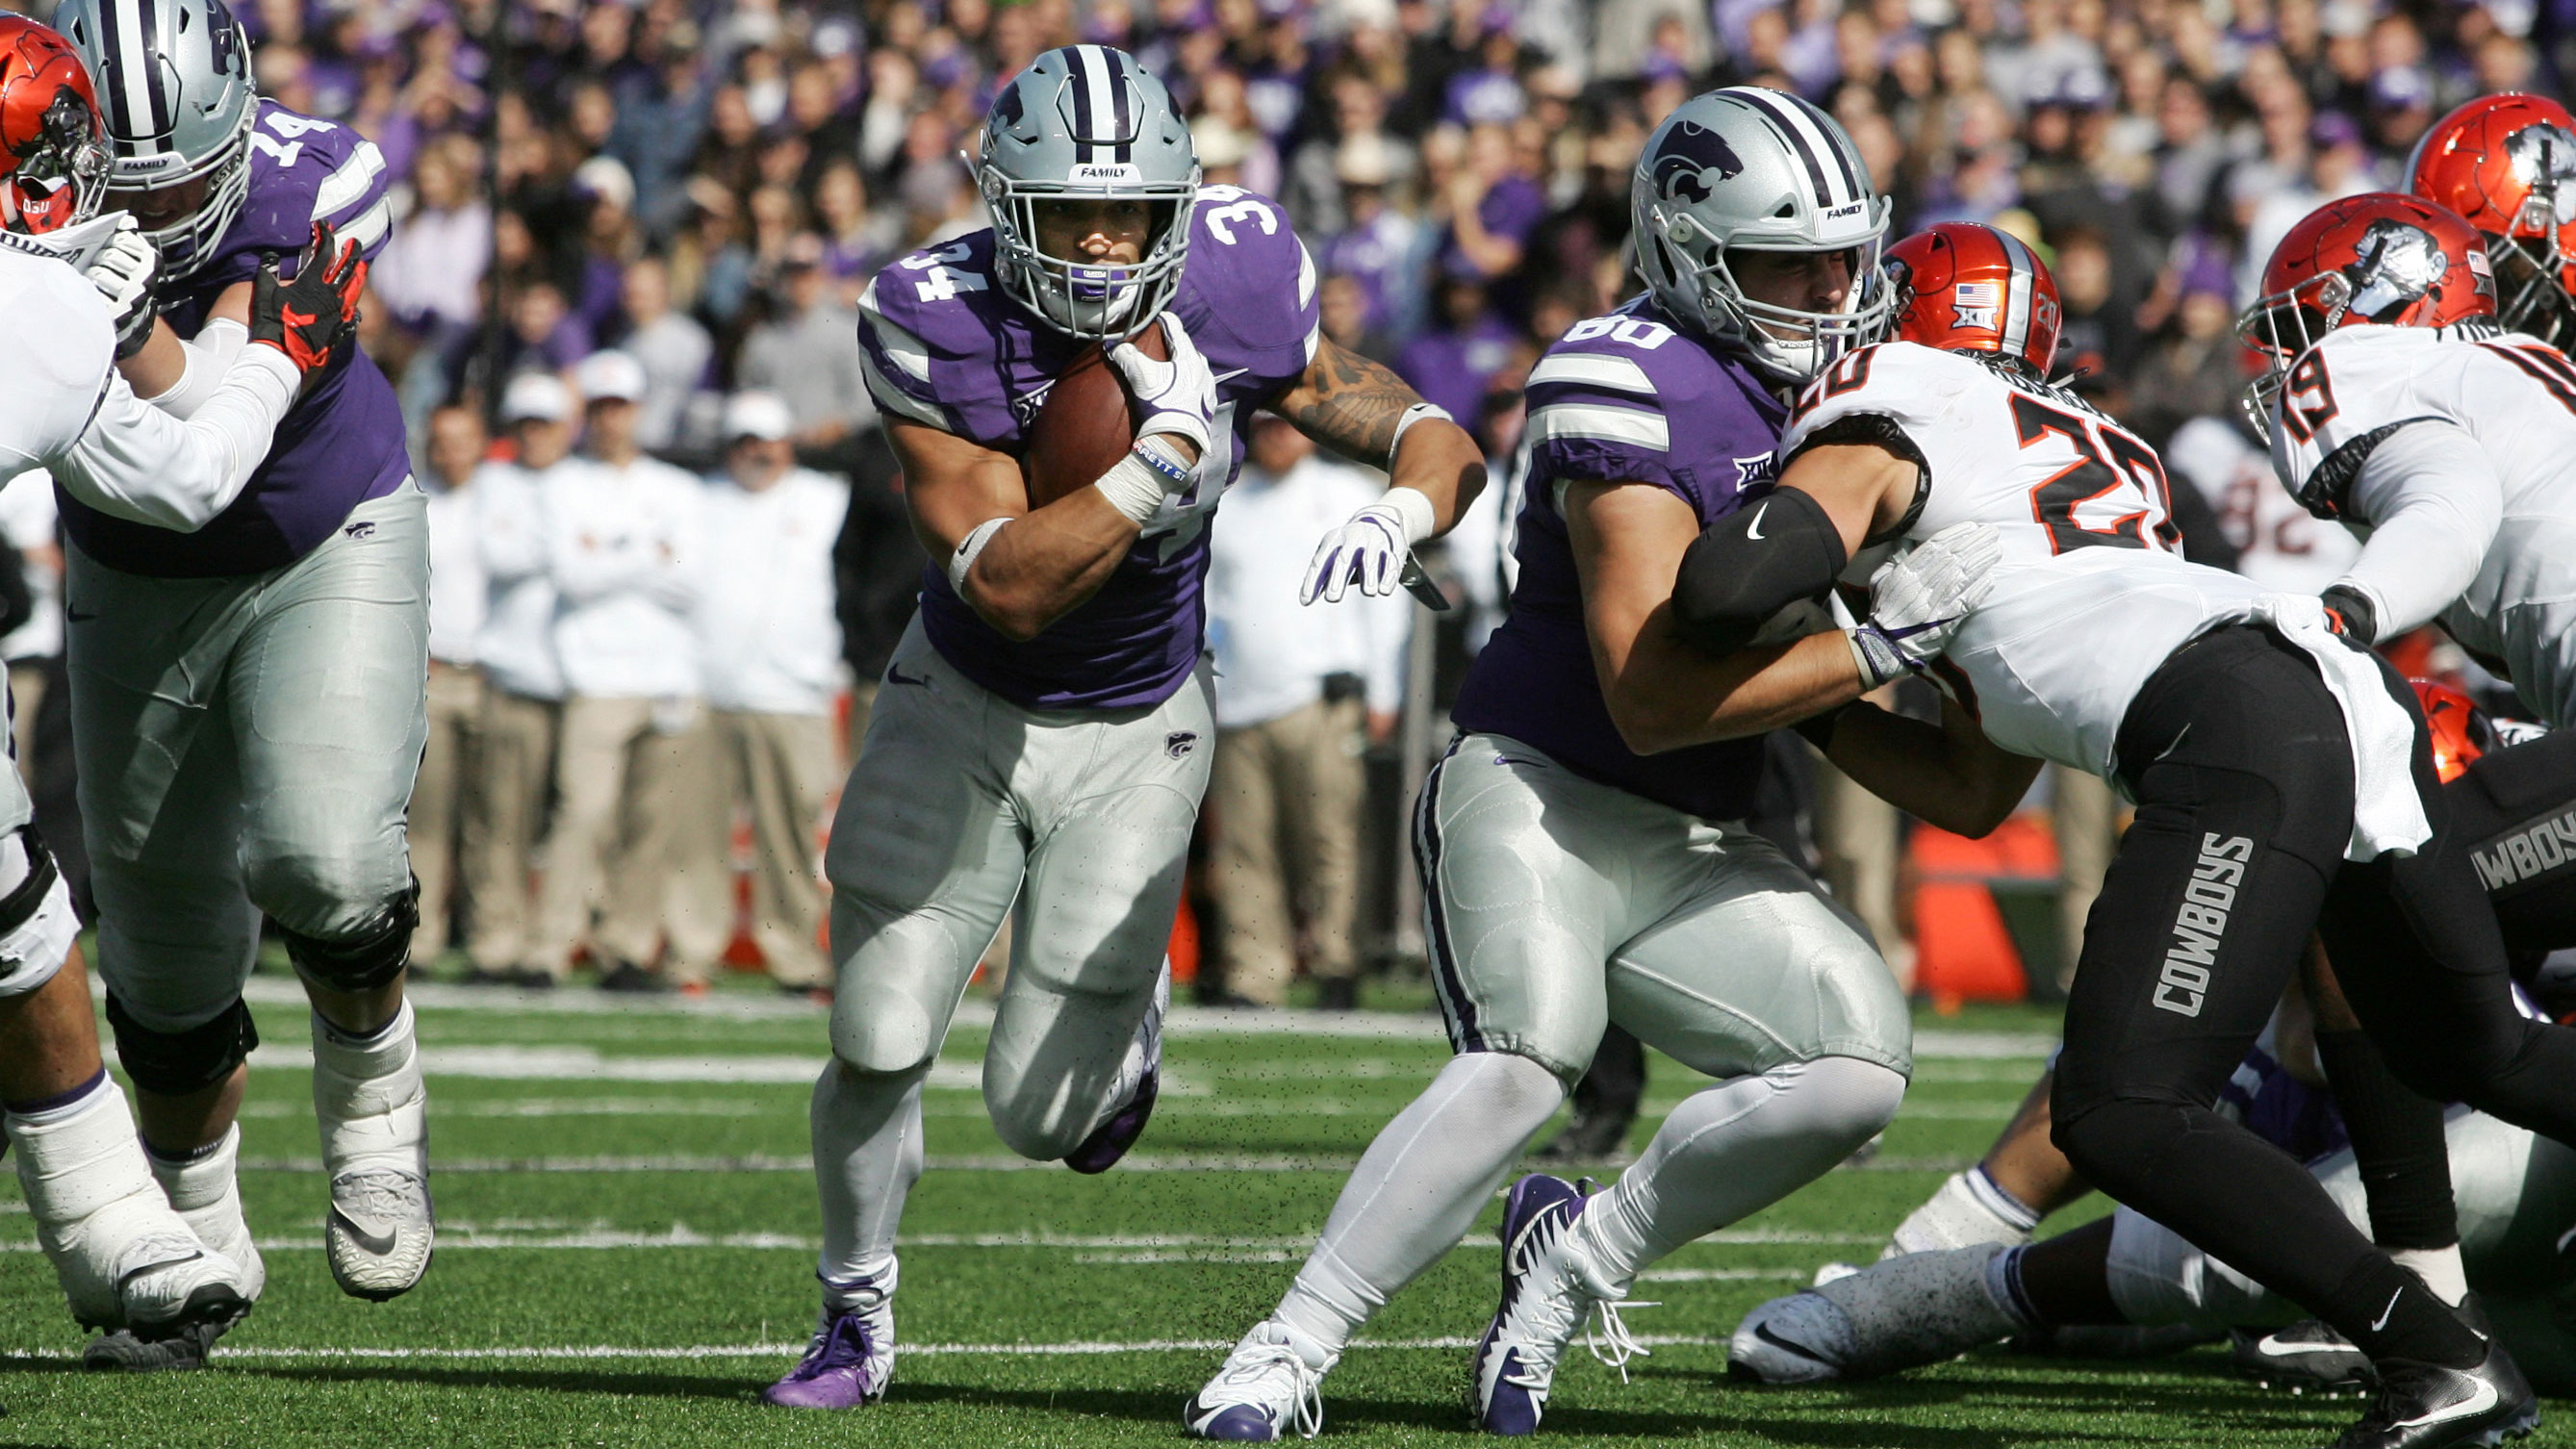 K-State's running game dominates in 31-12 victory over OSU